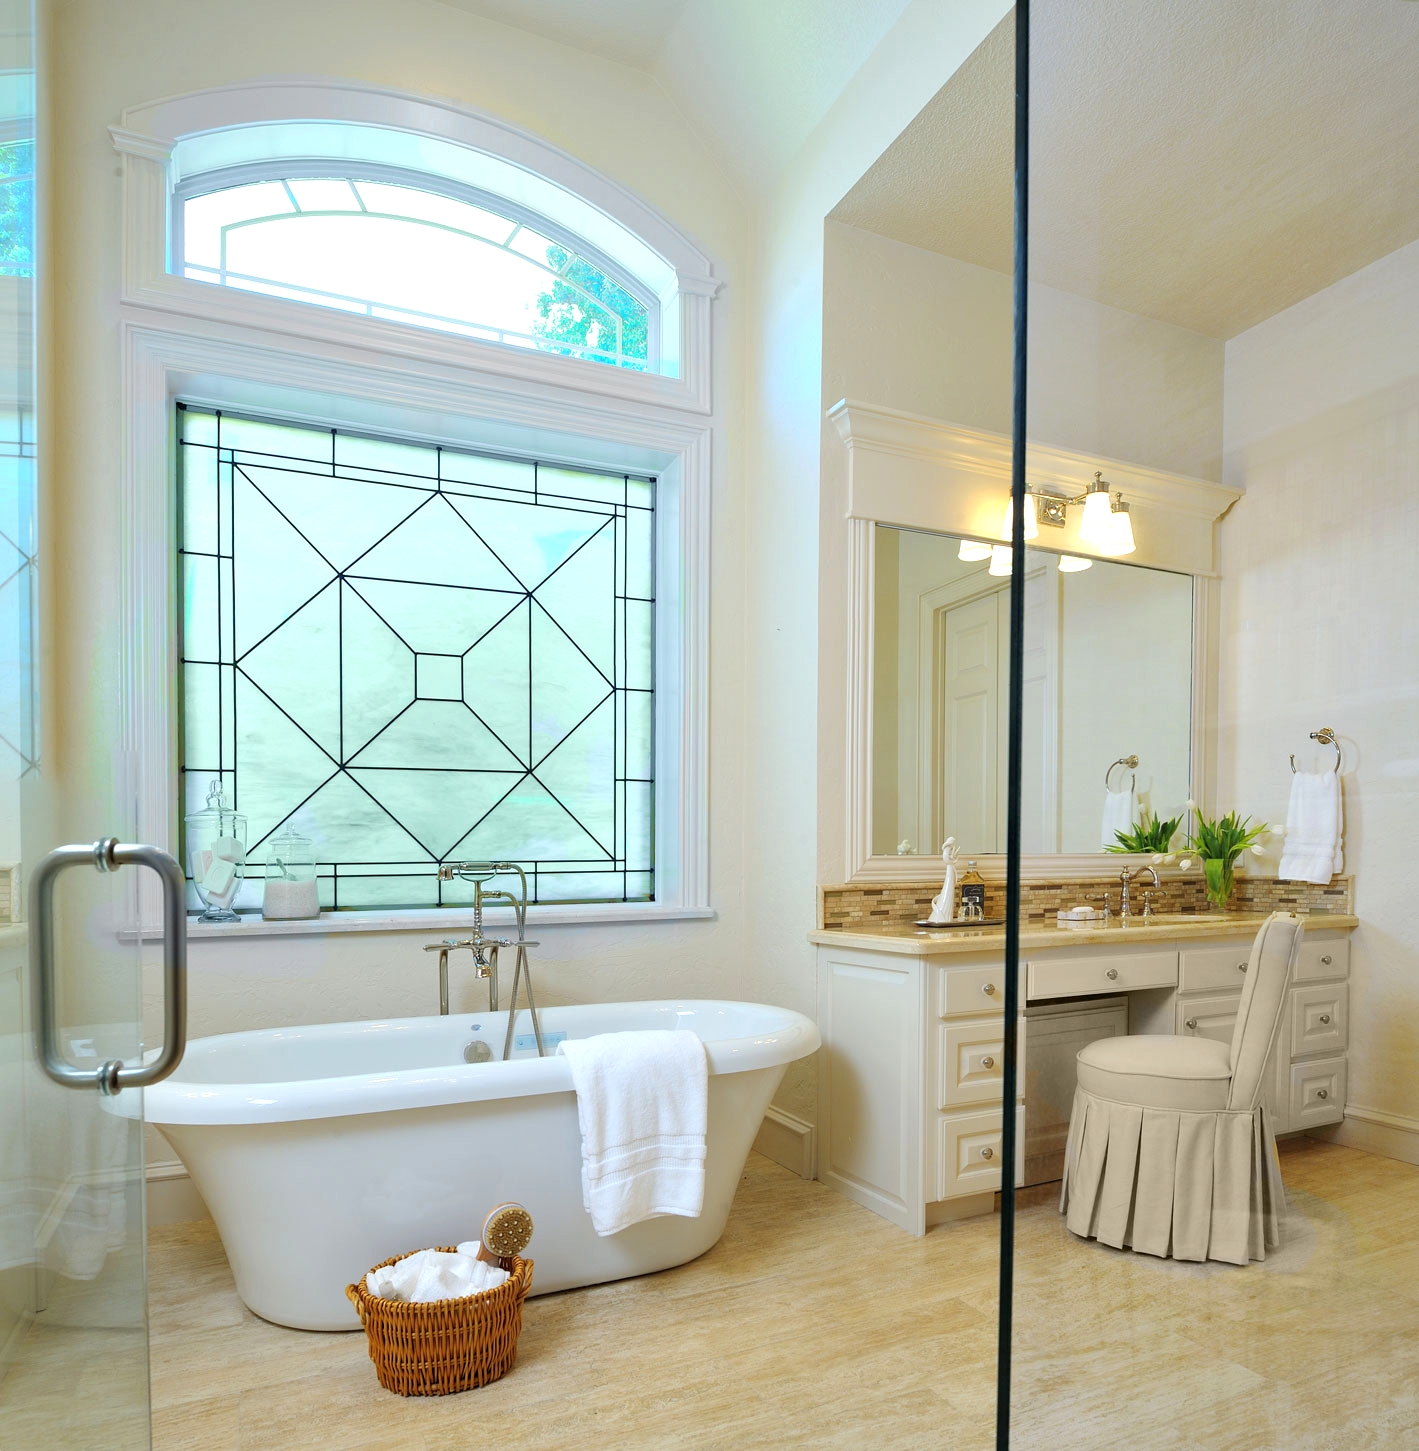 Top 10 Bathroom Design Trends Guaranteed To Freshen Up Your